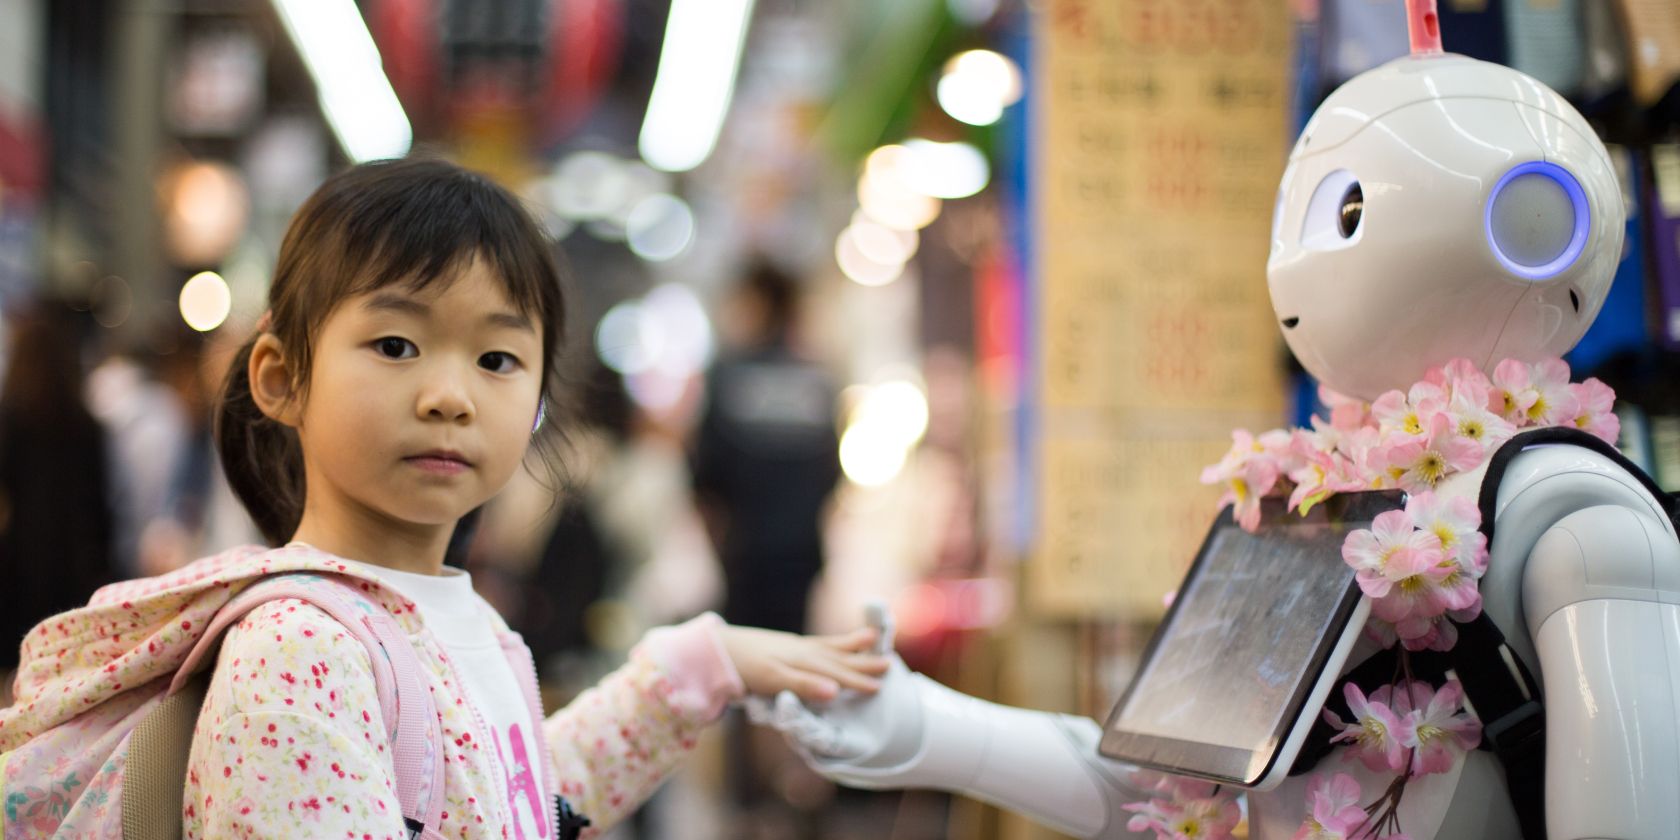 litlte girl holding hands with robot